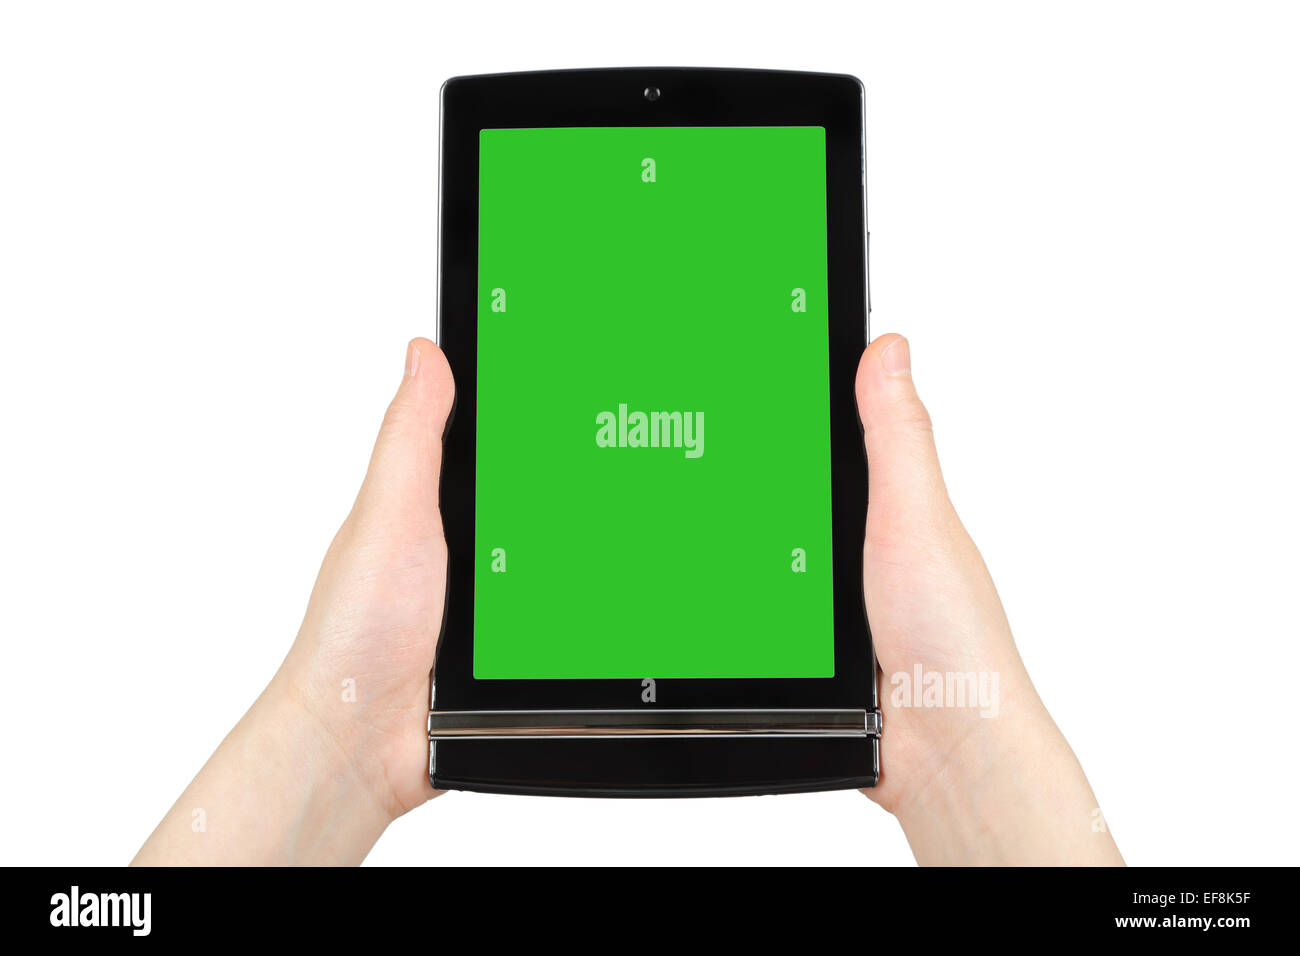 Hands holding touch screen tablet pc with green screen Stock Photo